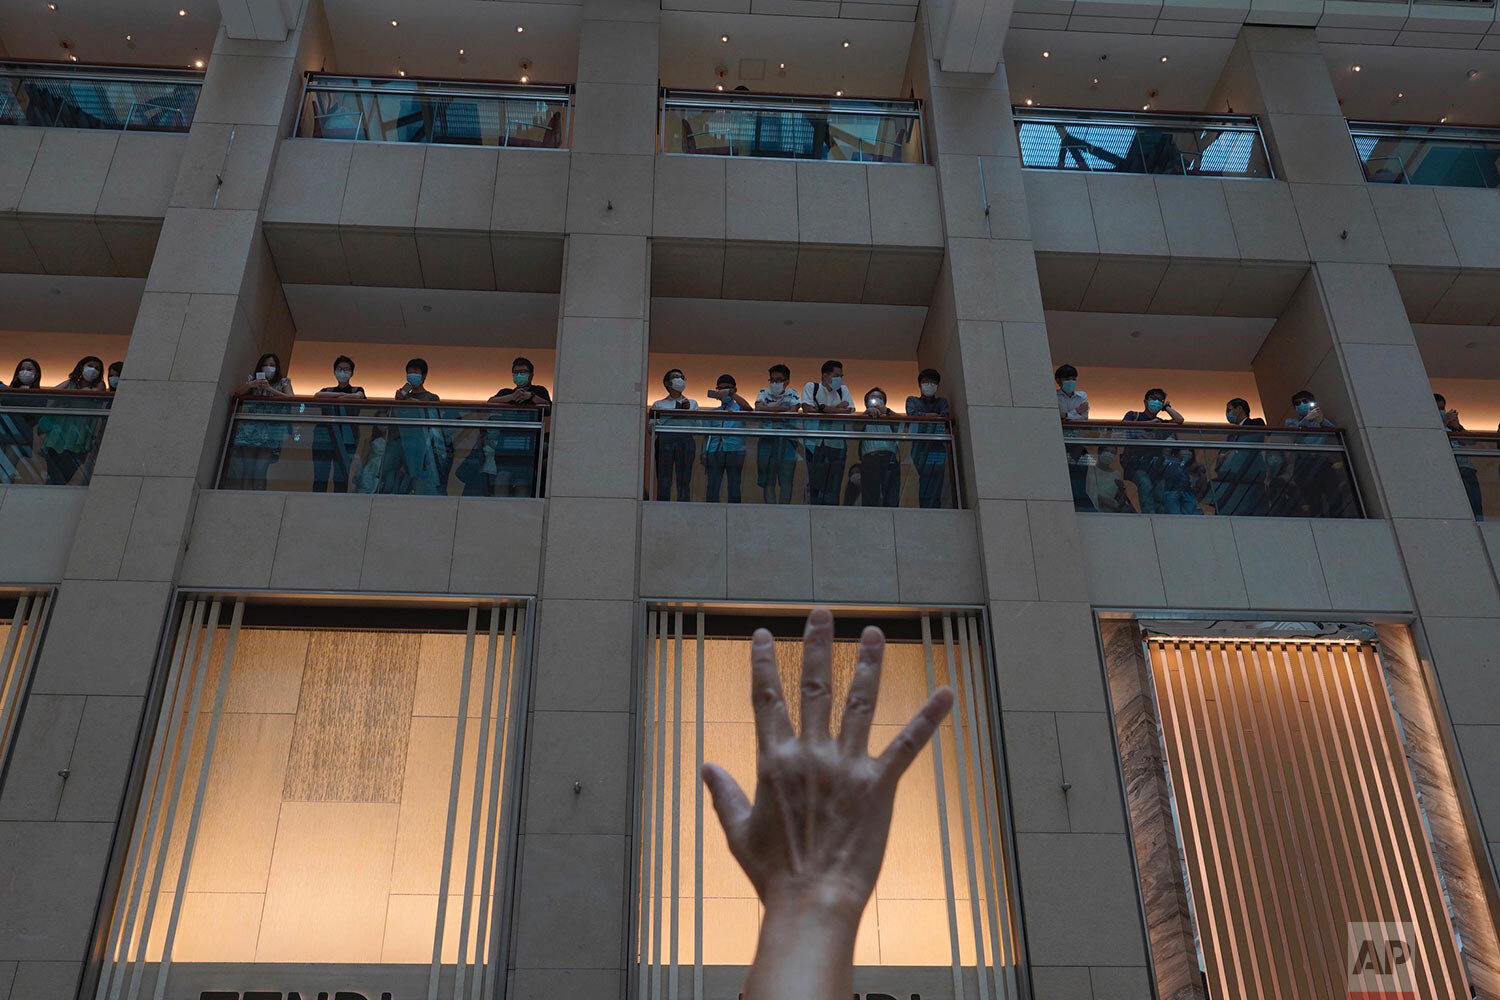  A protester gestures with five fingers, signifying the "Five demands - not one less" in a shopping mall during a protest against China's national security legislation for the city, in Hong Kong, Monday, June 1, 2020.  (AP Photo/Vincent Yu) 